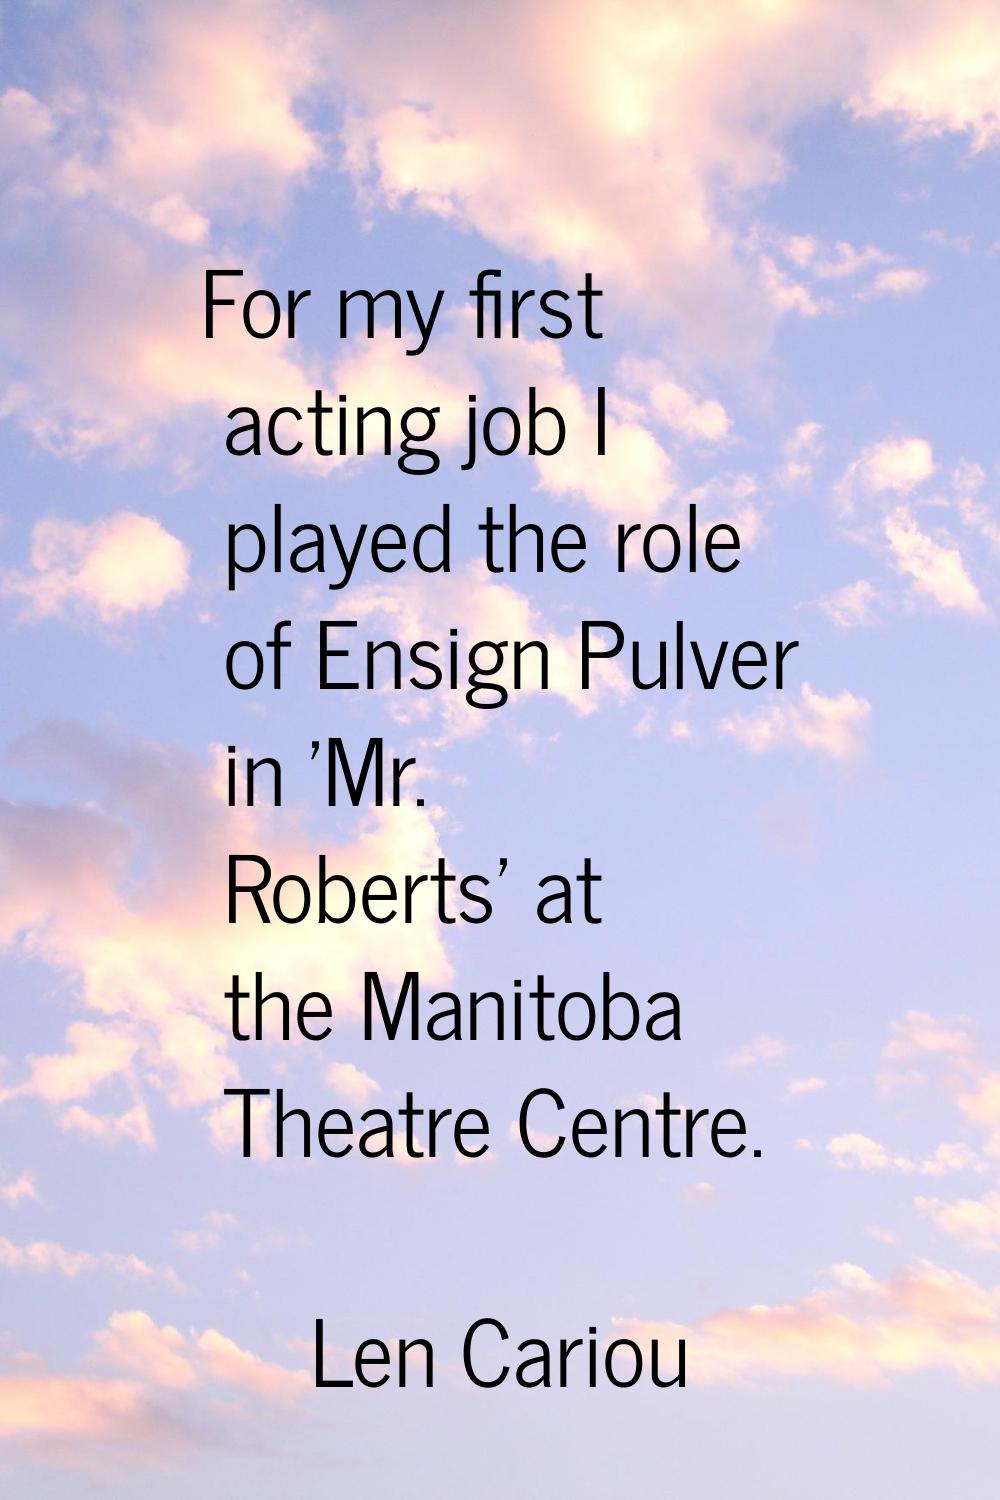 For my first acting job I played the role of Ensign Pulver in 'Mr. Roberts' at the Manitoba Theatre